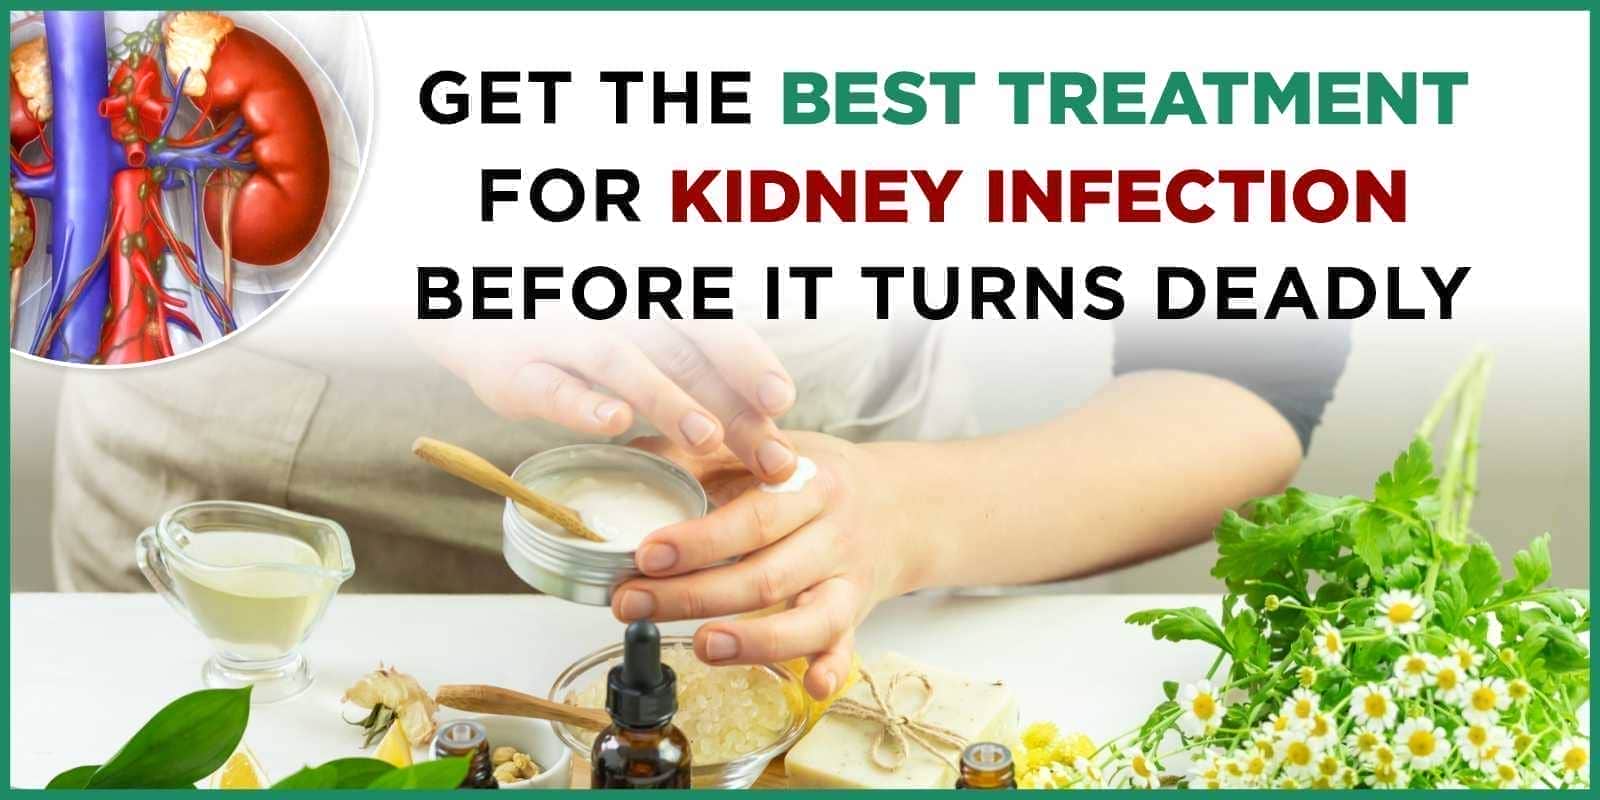 Get the Best Treatment for Kidney Infection Before It Turns Deadly